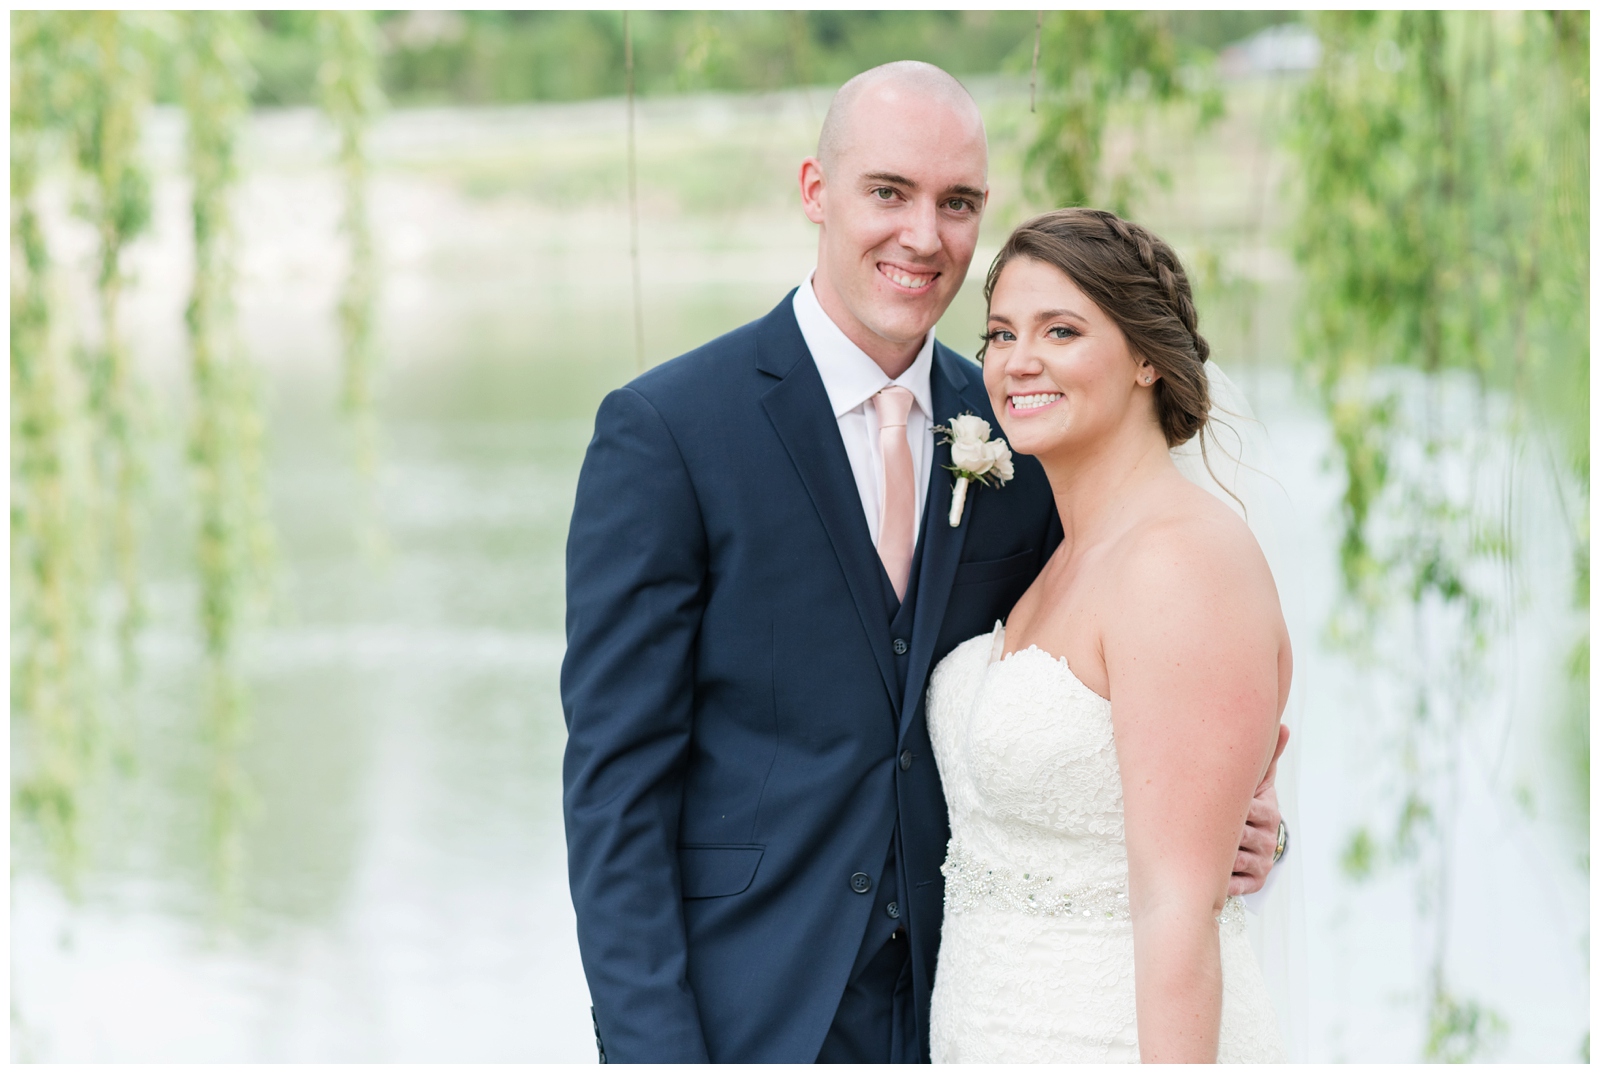 bride and groom smile at Ohio wedding photographer Piper's Photography during portraits under willow tree